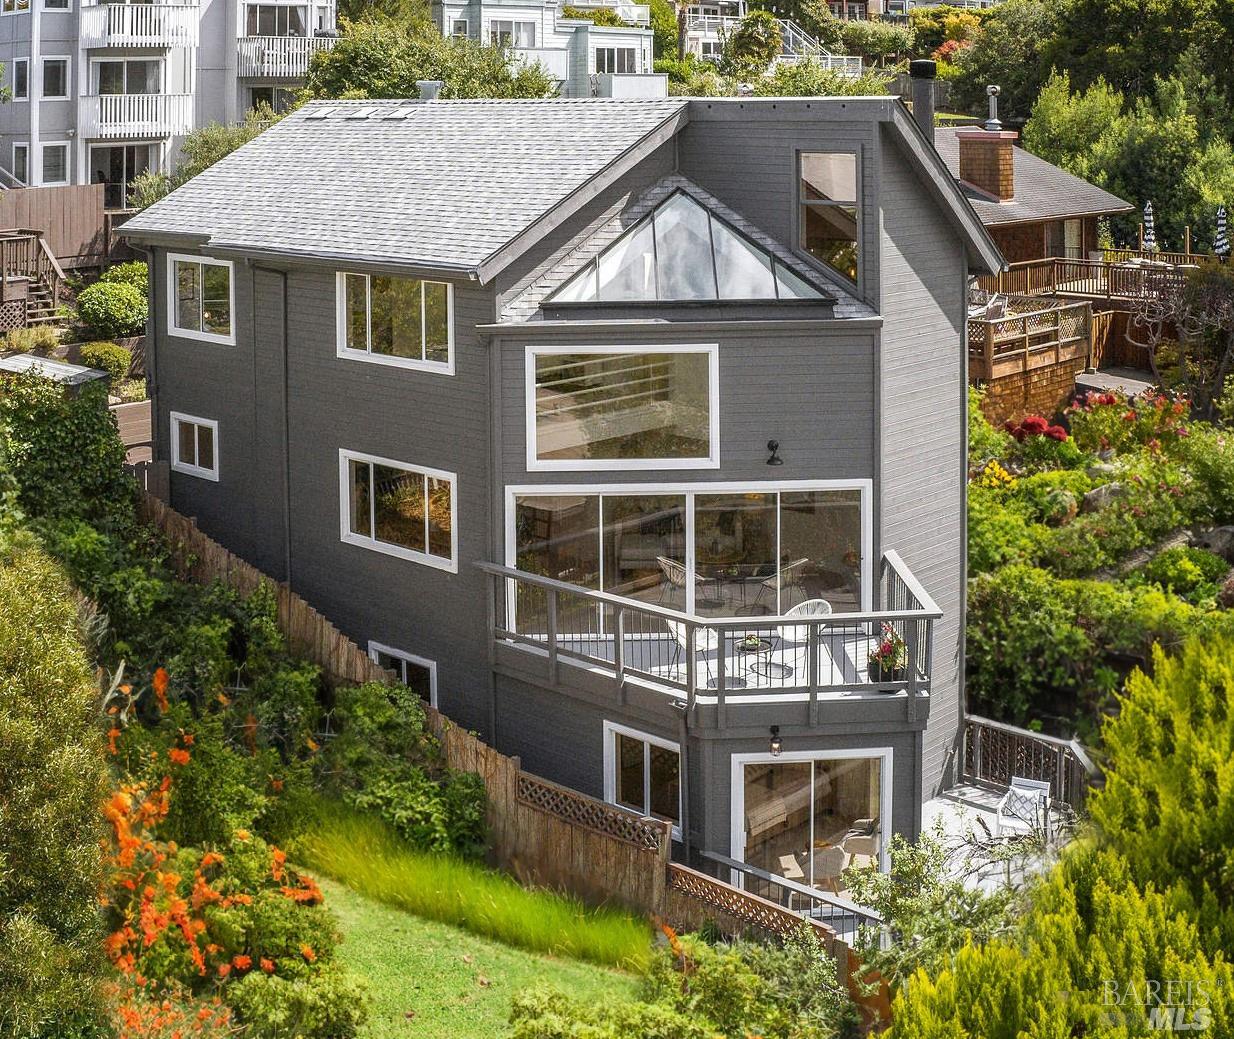 1 Contemporary Coastal View Home & 1 Captain's Cottage = Amazing Rare oppty for owner/user, income or investment!  509 Easterby, built in 1989, is a 3 story, light filled modern gem w/ epic Bay views! This 3BR/2.5BA, 2070 SF home is set back from street for privacy & weather & great indoor/outdoor entertaining spaces!   Entry lvl includes 2 spacious guest BRs (1 w/vu deck), storage, Lndry closet (W/D) and BR w/tub. Upstairs opens to great room with vaulted ceiling, skylights, fireplace, view deck, loft primary suite above, powder room and Chef's kitchen that opens to expansive priv. terraced garden, decks & outdoor kitchen!  The entire upper lvl is primary ste w/ pano Bay vus, vaulted ceiling, skylights, sep. sitting rm w/deck, wall of closets and spacious bathroom. Abundant recent upgrades incude new roof, sewer lateral, high quality interior/exterior paint, new irrigation, landscaping, lighting, flooring and more. 509A Easterby, the Captain's Cottage circa 1907 has been a popular rental with long term tenants. Loaded w/charm, this light filled 1BR/1BA w/remodeled kitchen, updated BA, W/D, DR, lrge deck, priv. patio. 2 car garage and separate storage have been shared. Located 1 blk from Schoonmaker Beach, Caledonia, 1/2 blk to transportation and move-in ready!